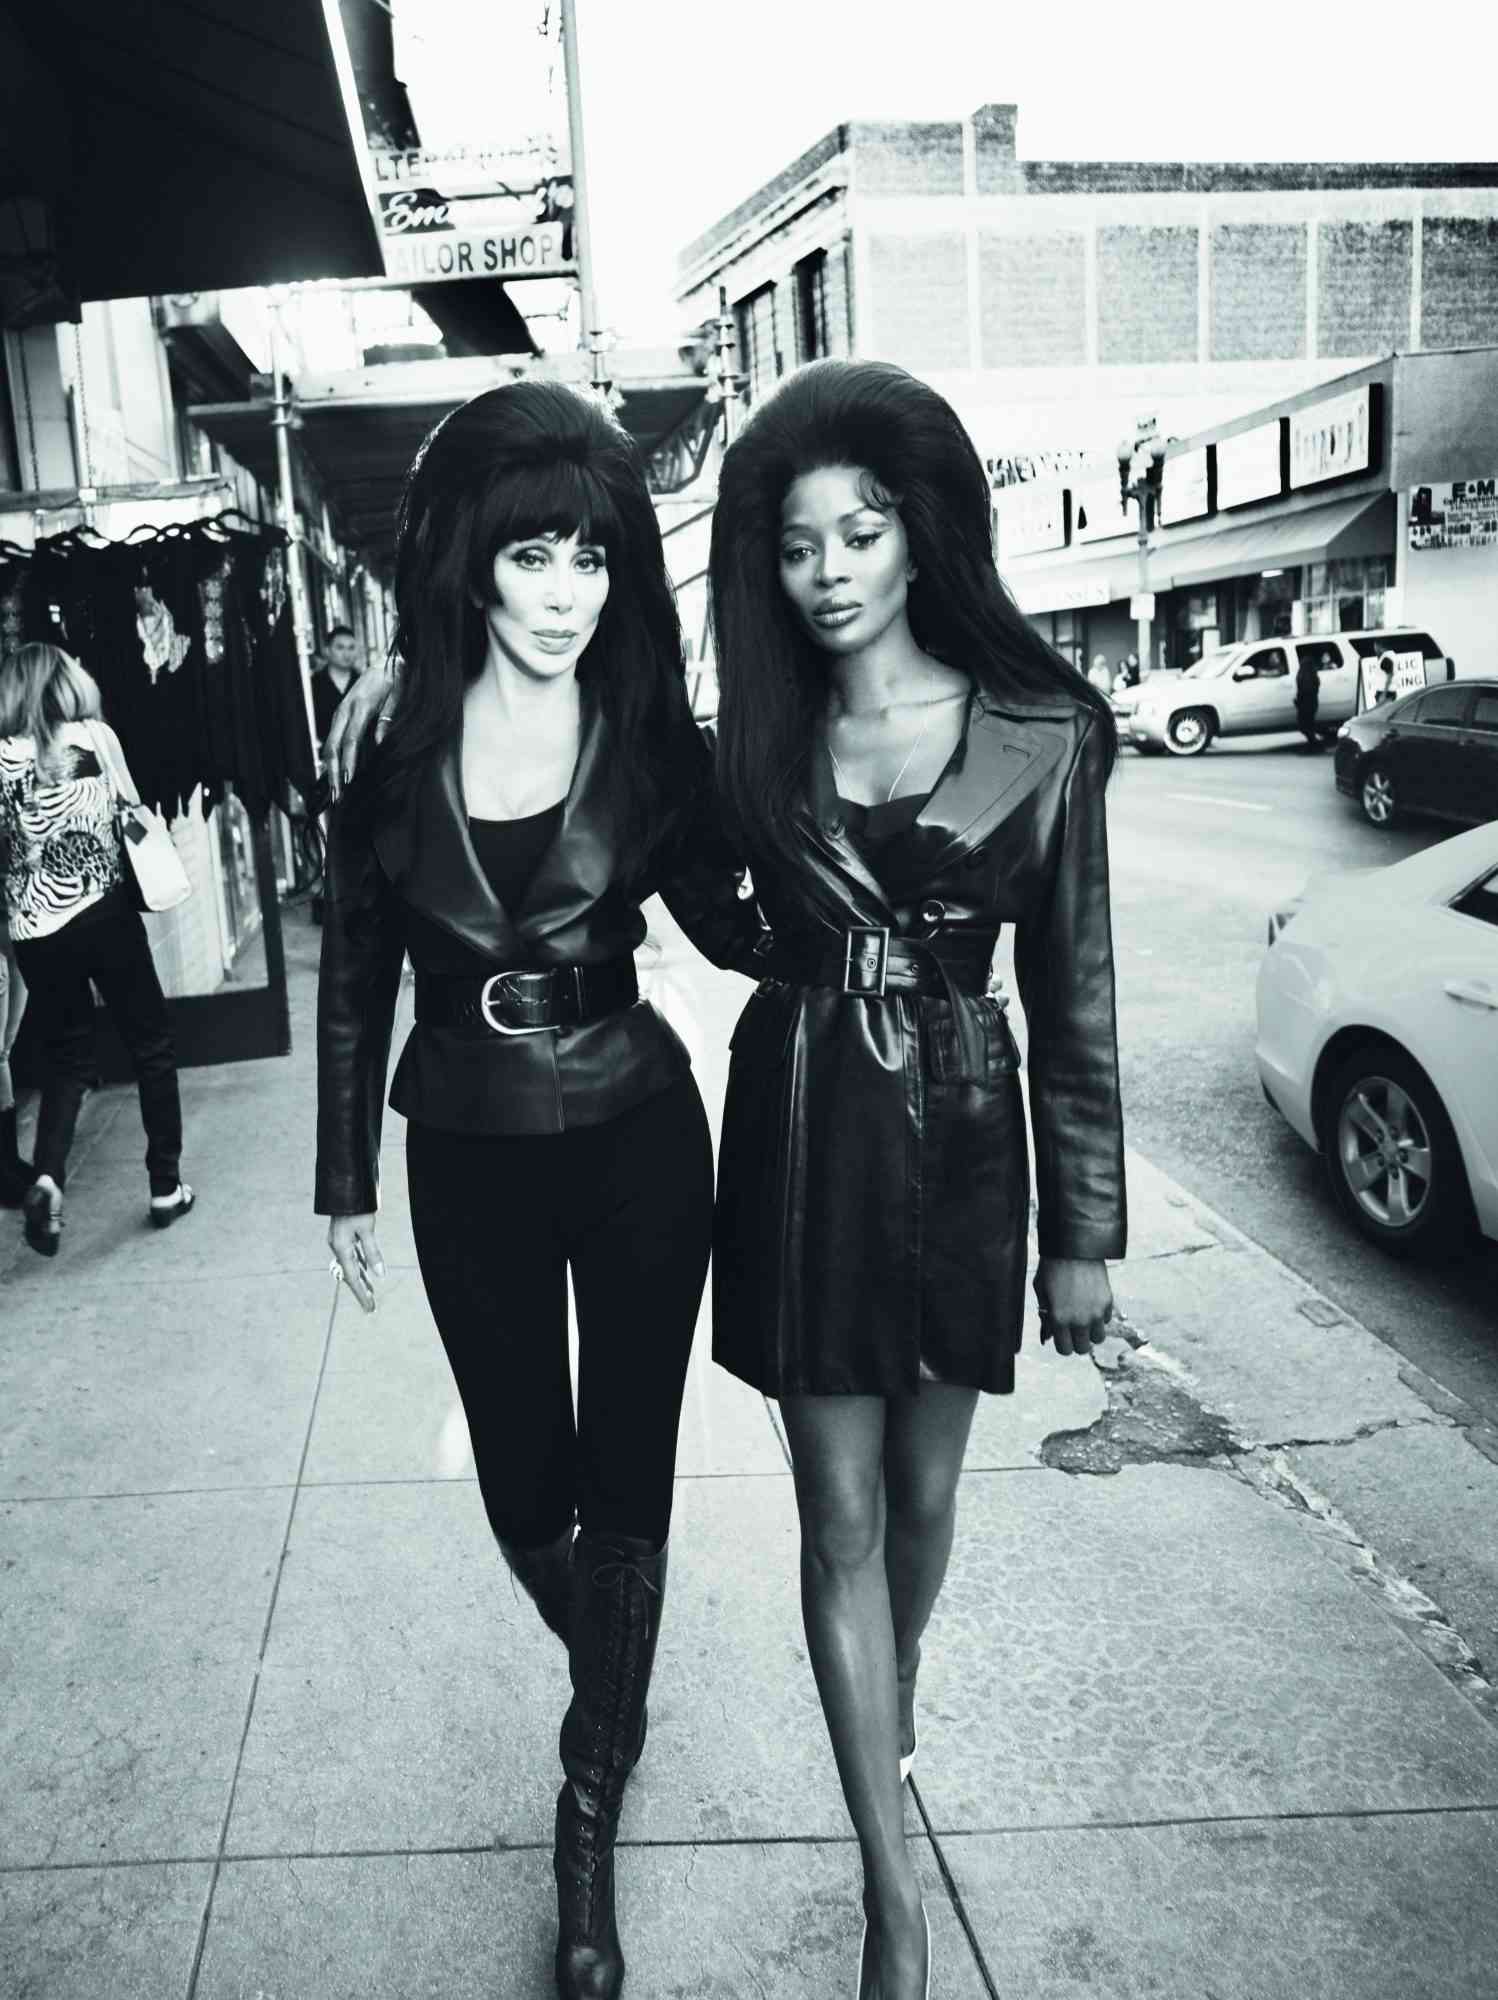 Cher and Naomi Campbell shot by Mert and Marcus for CR Fashion Book Issue 16.jpg